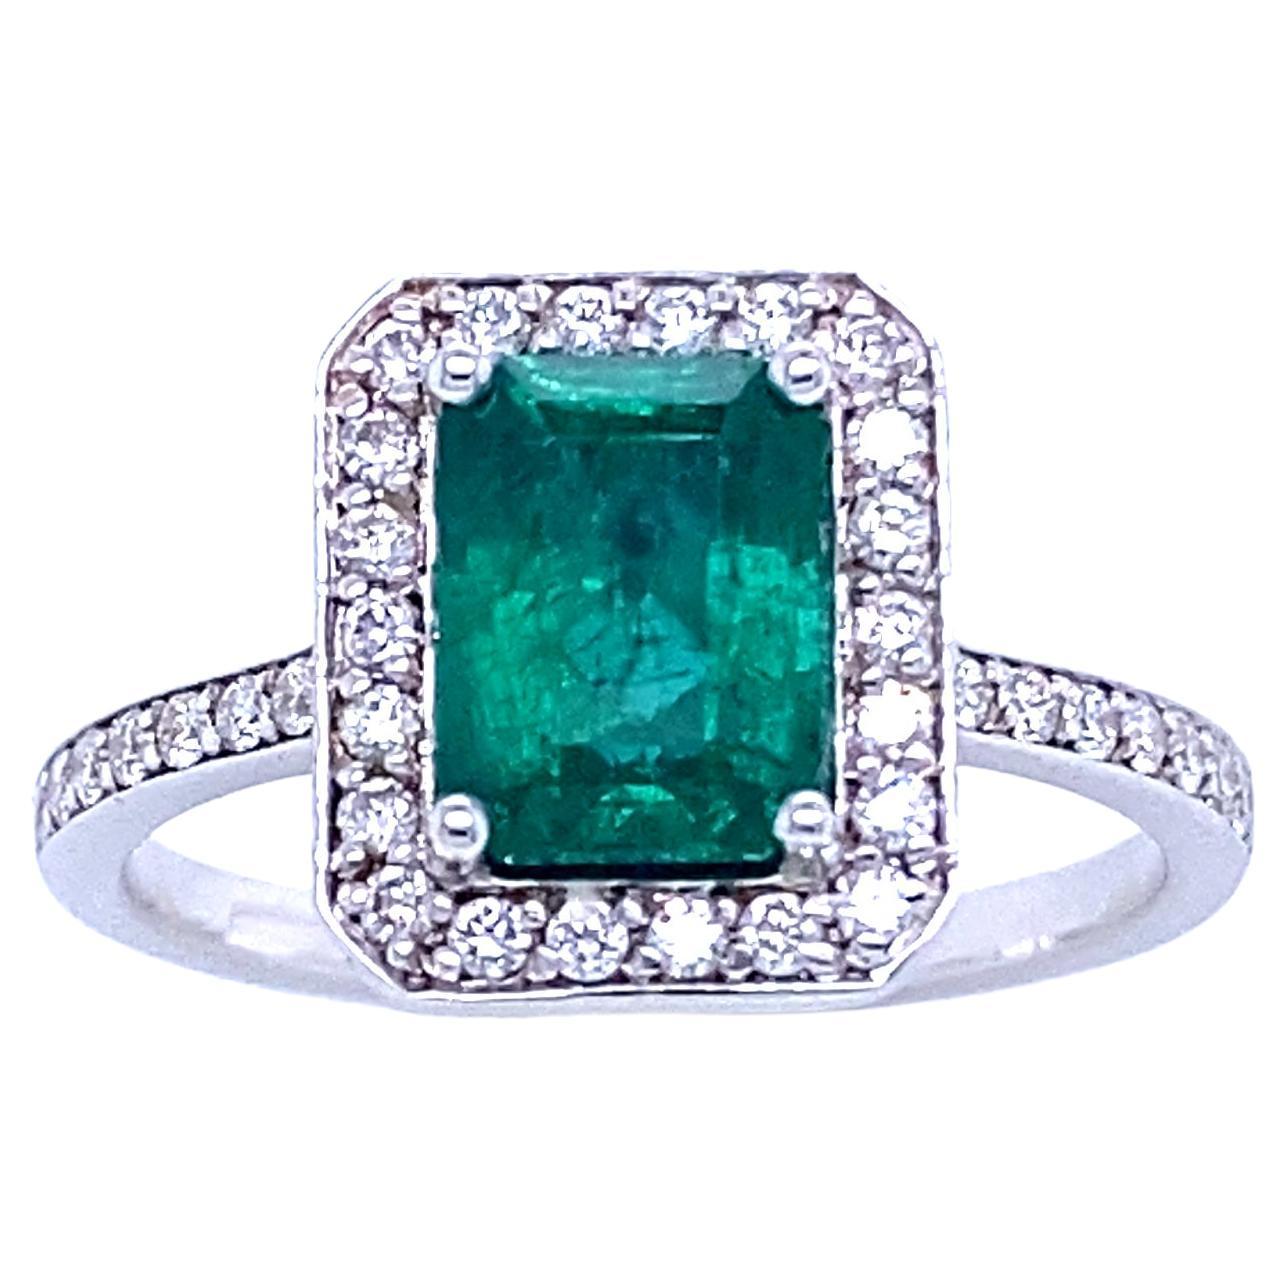 Ring Surmounted by an RPC-Cut Emerald Surrounded by Diamonds White Gold 18 Karat